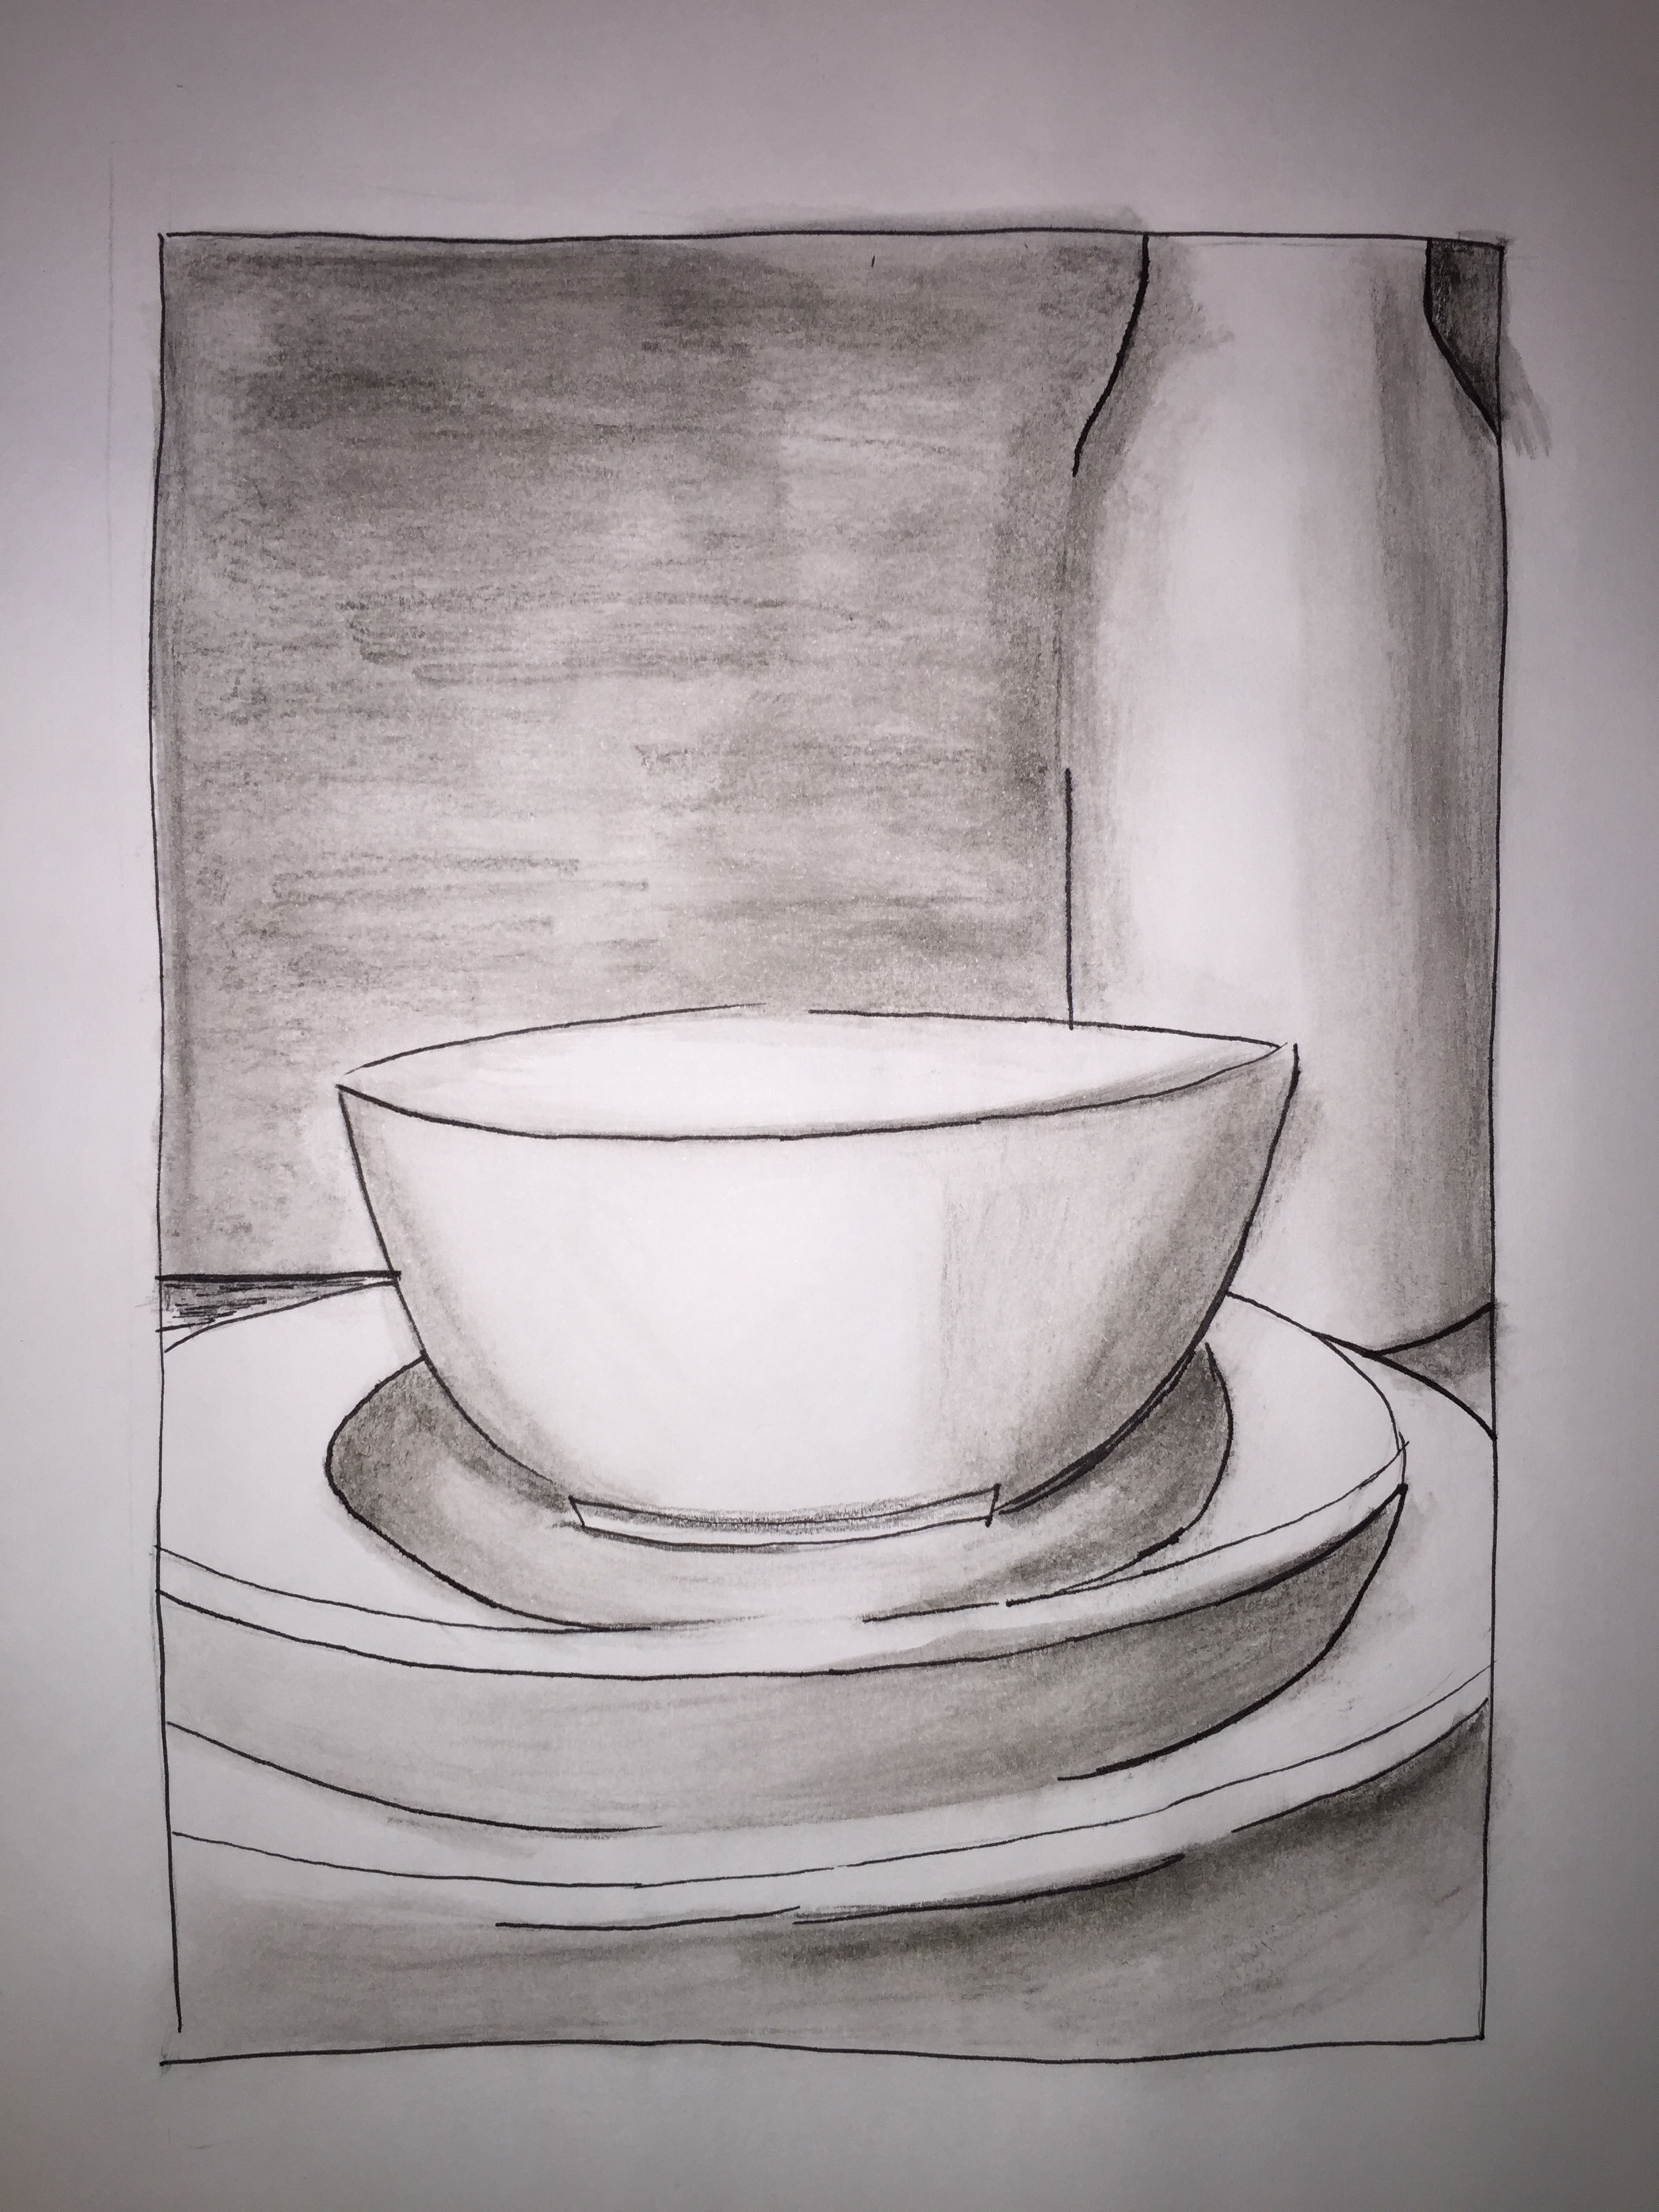 Sketchbook Assignment #1: Simple Forms